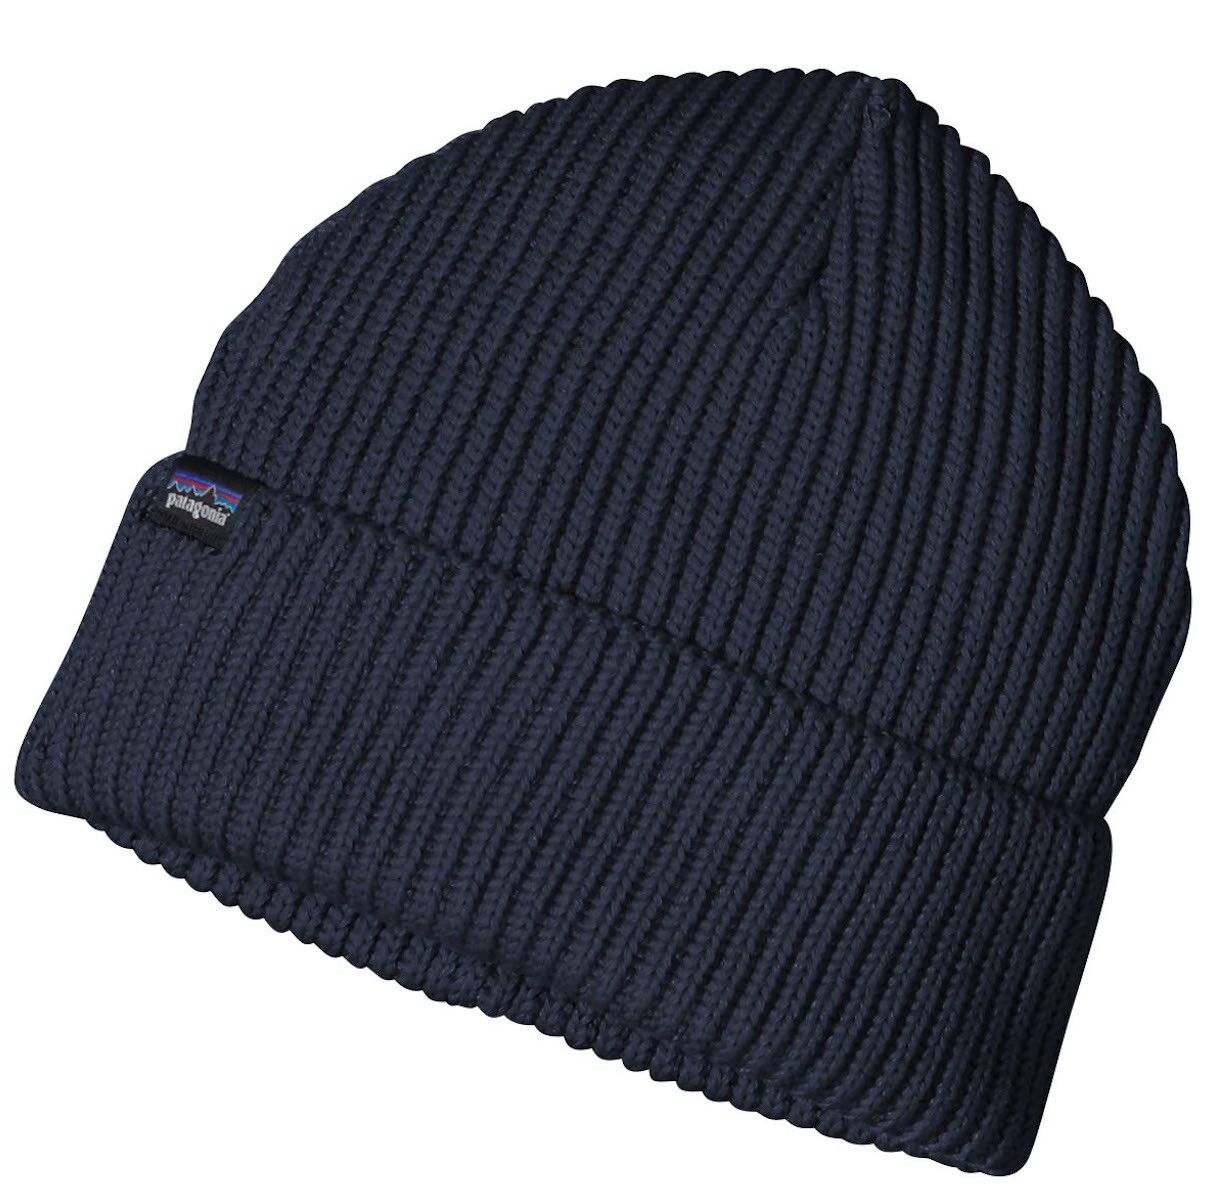 Patagonia Fisherman's Rolled Beanie - Pipo